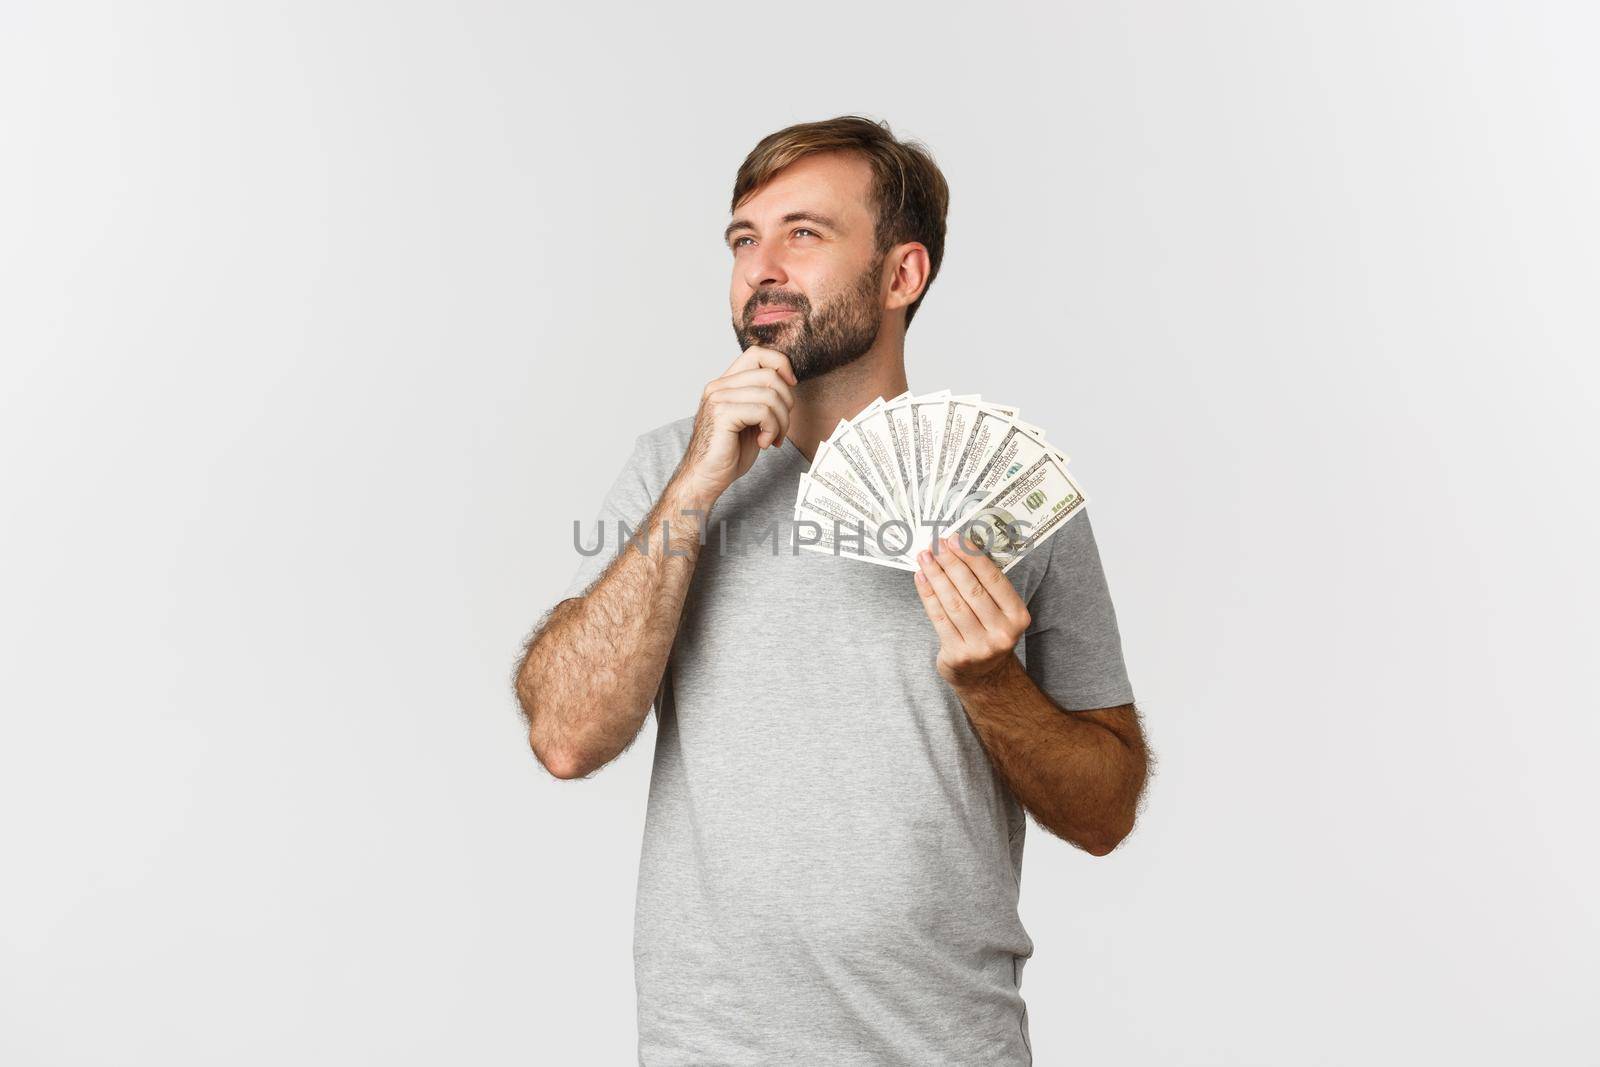 Thoughtful nice guy with beard, holding money and thinking about shopping, looking at upper left corner.